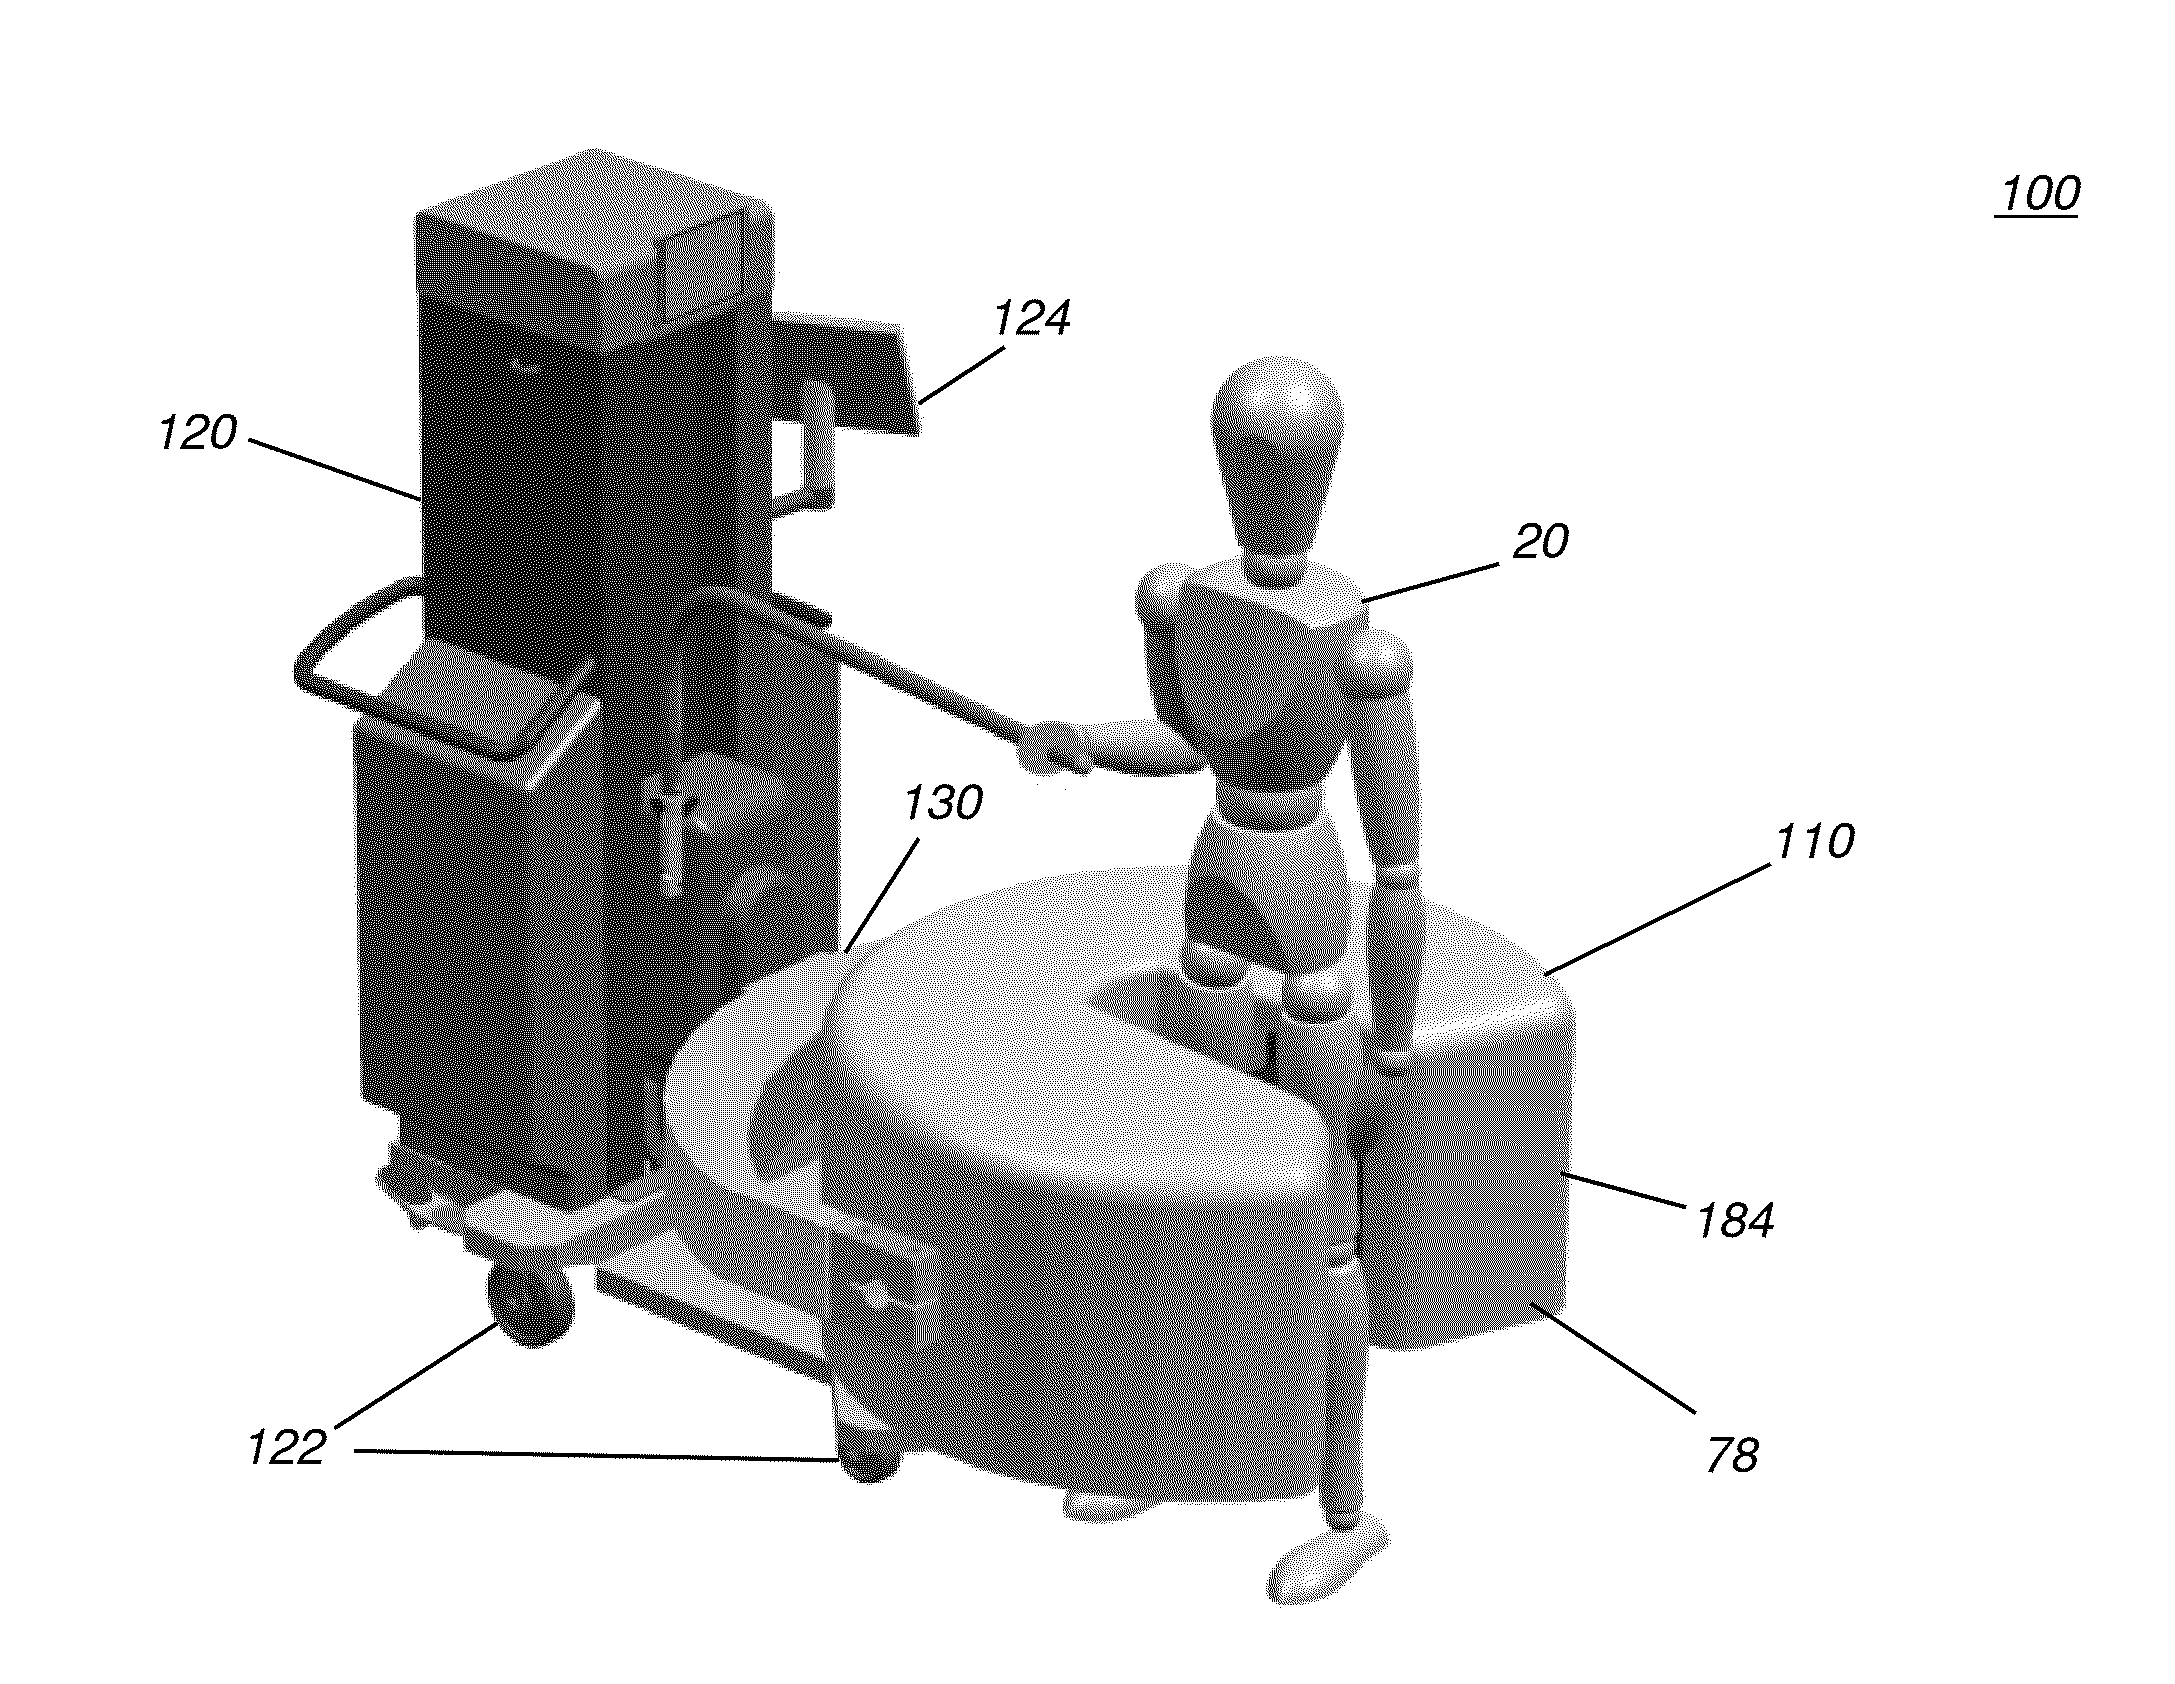 Extremity imaging apparatus for cone beam computed tomography